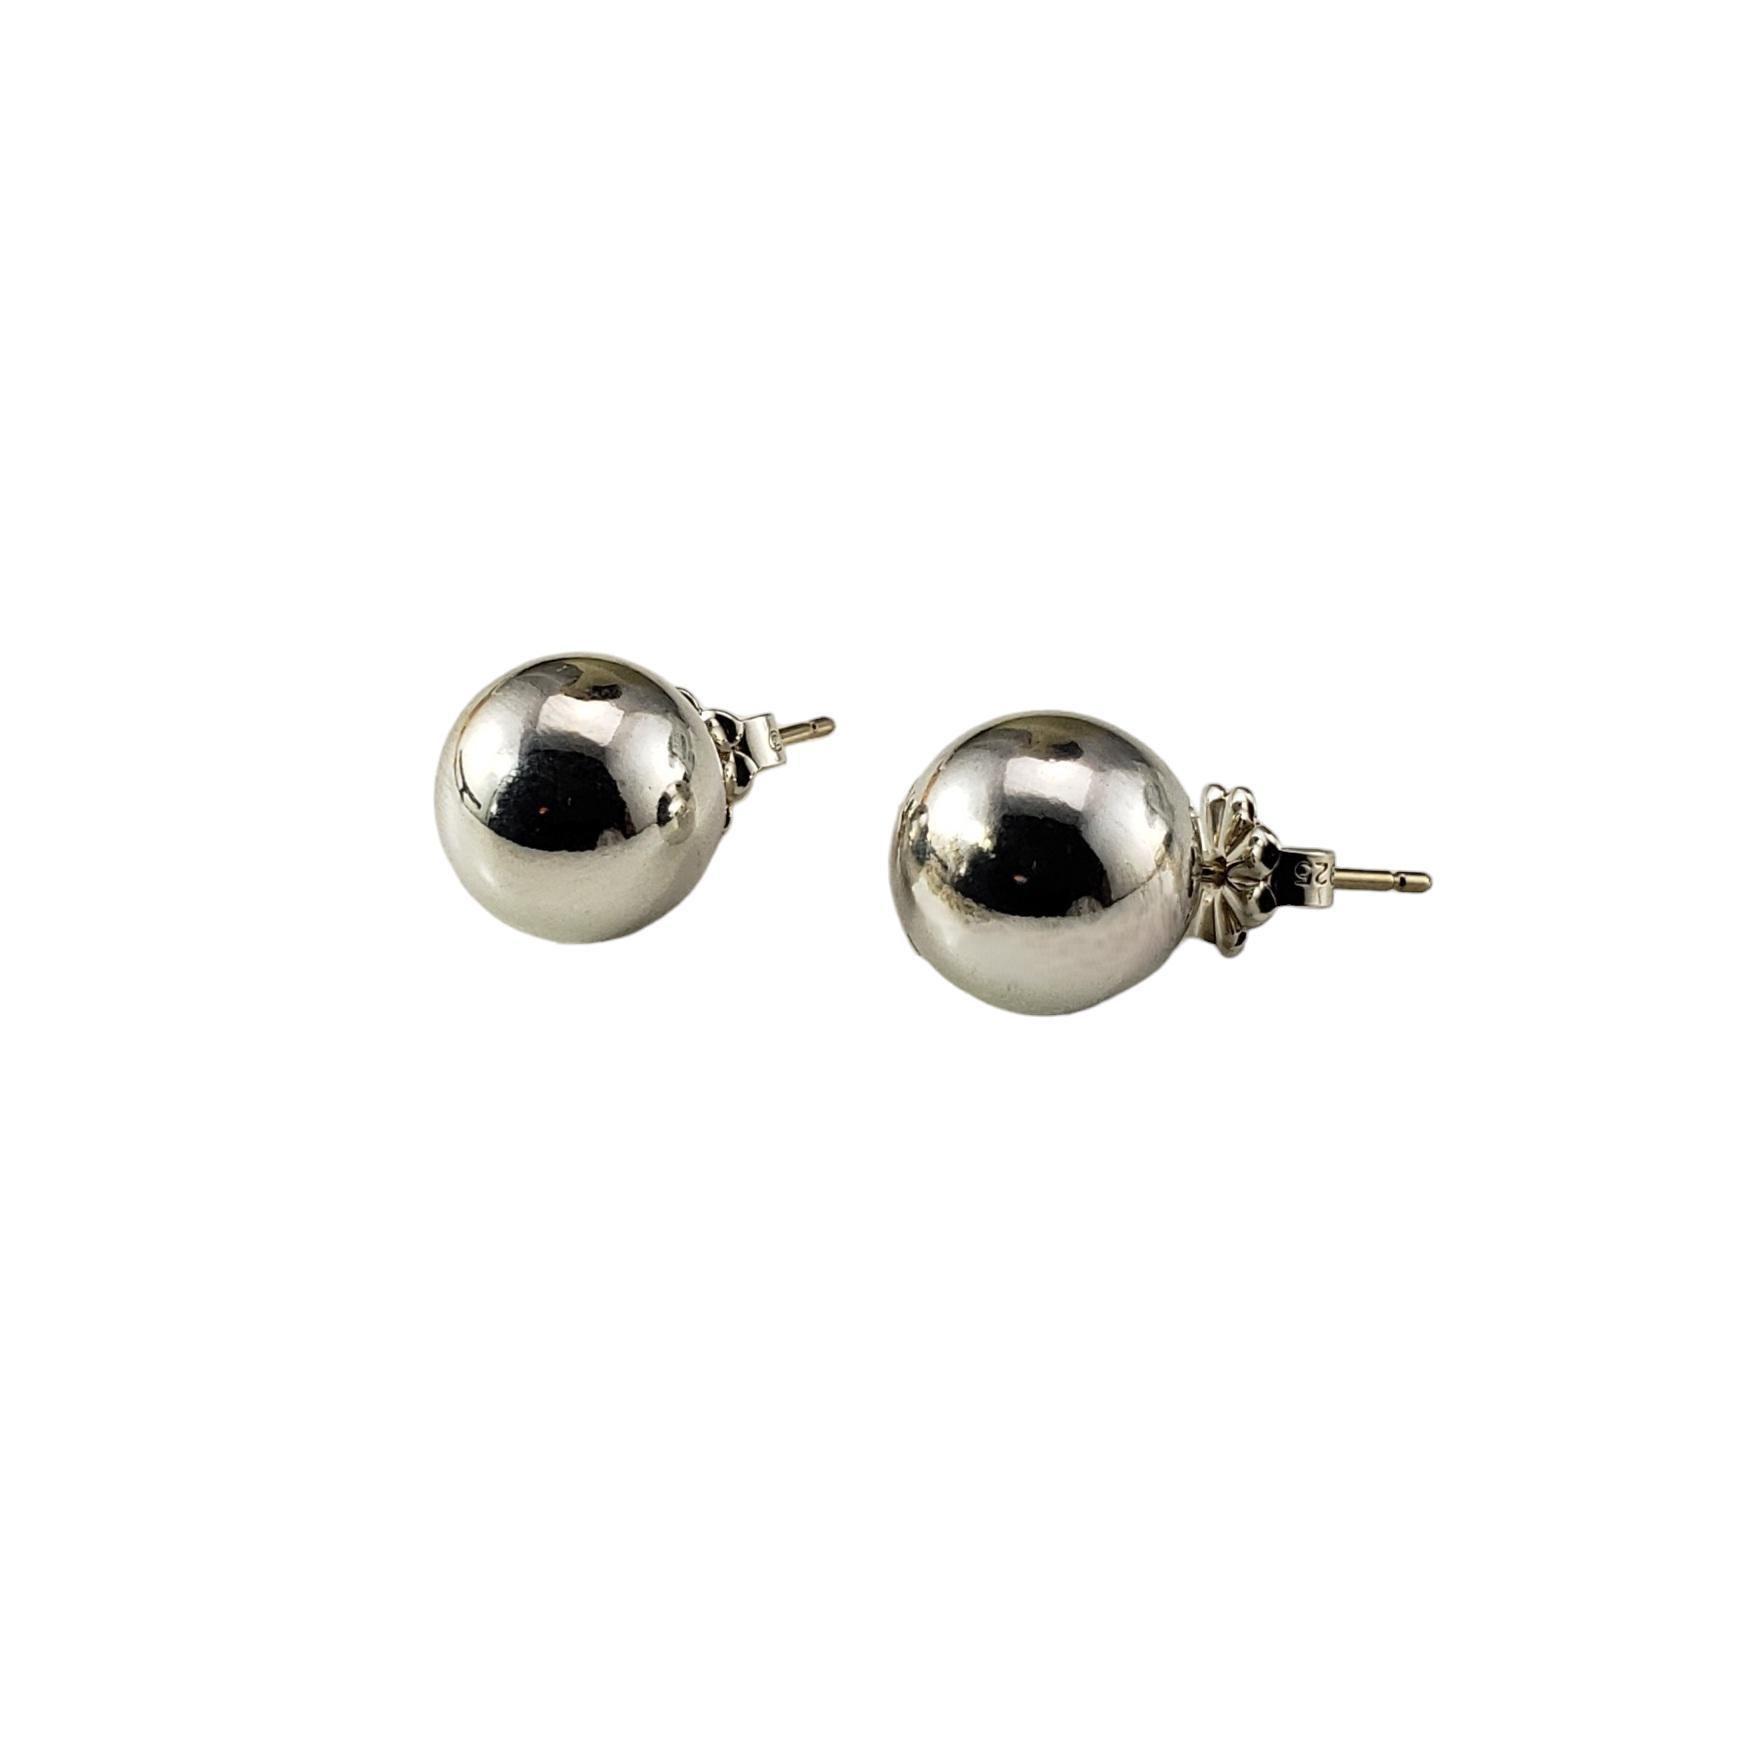 Tiffany & Co. Sterling Silver Ball 10mm Earrings #17163 In Good Condition For Sale In Washington Depot, CT